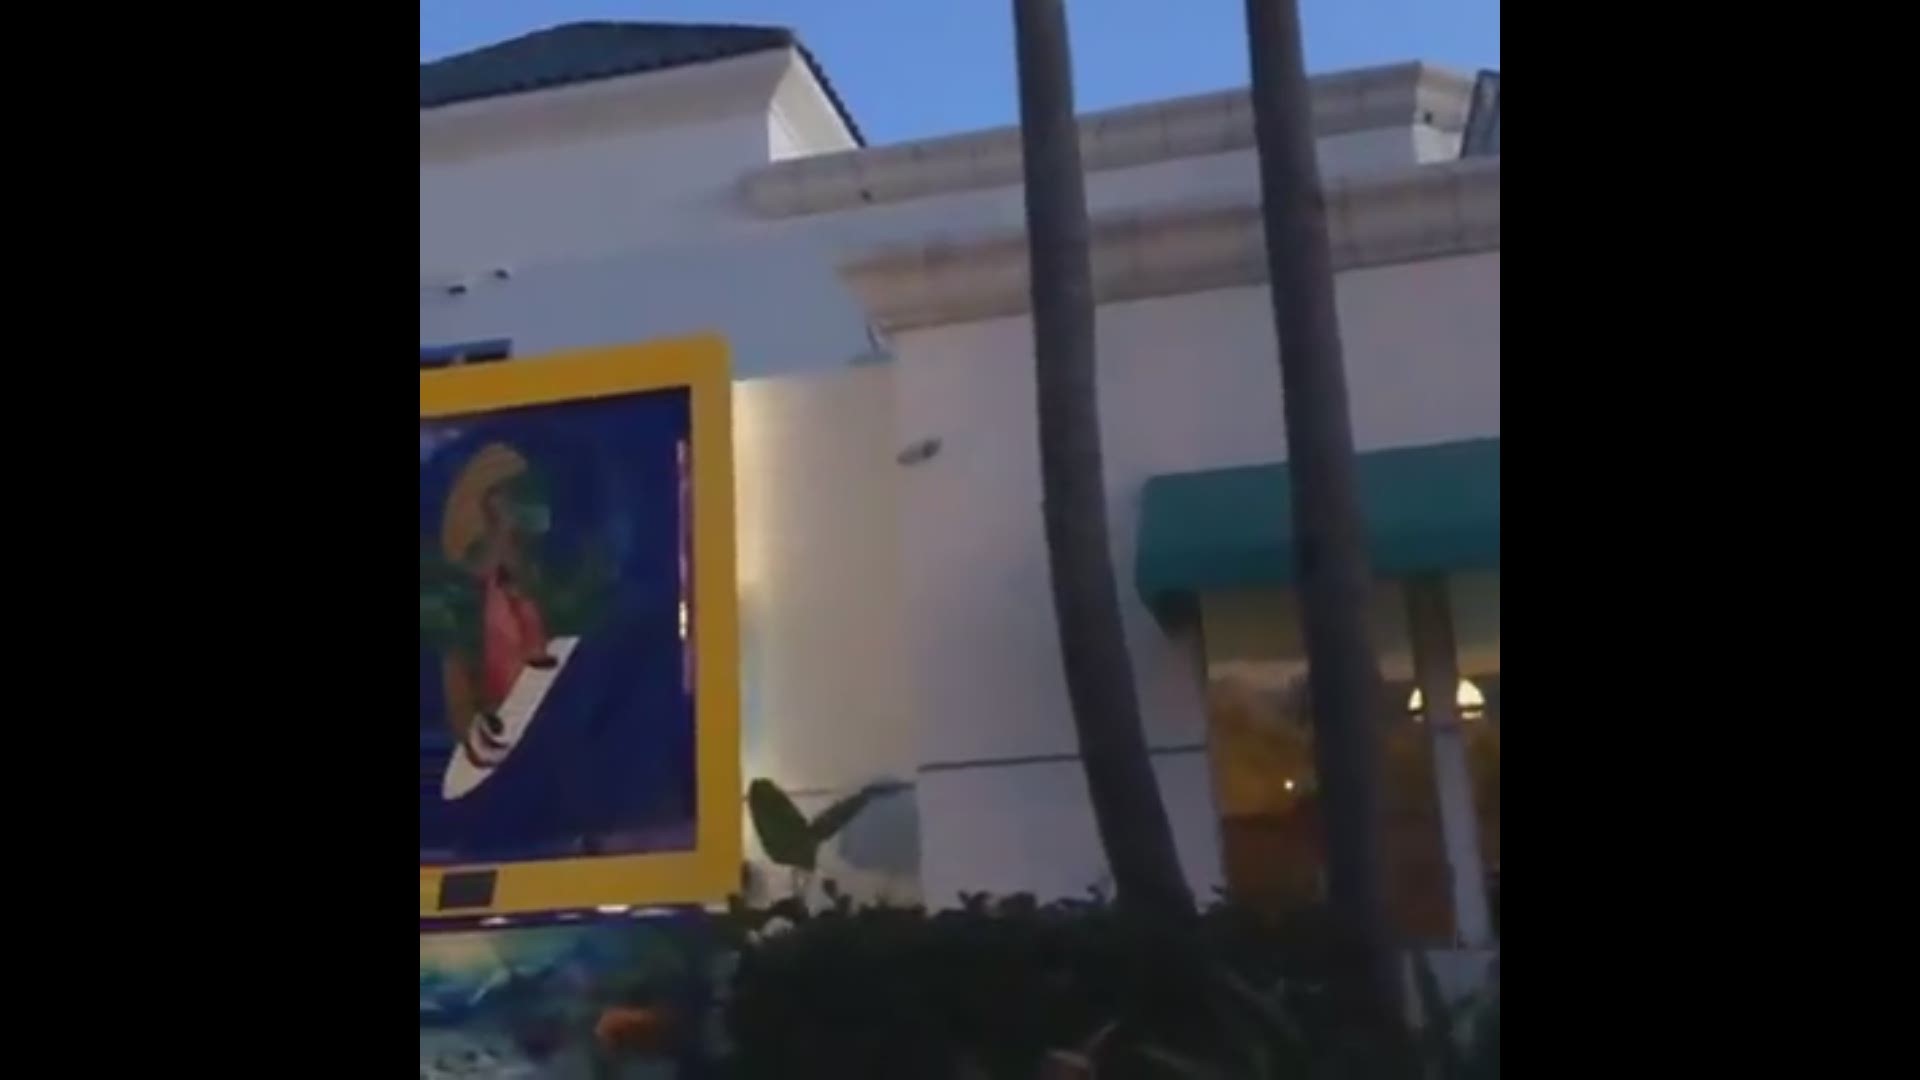 Some slo-mo video passing the Surfing Madonna in Encinitas in San Diego. Video by News 8's Abbie Alford